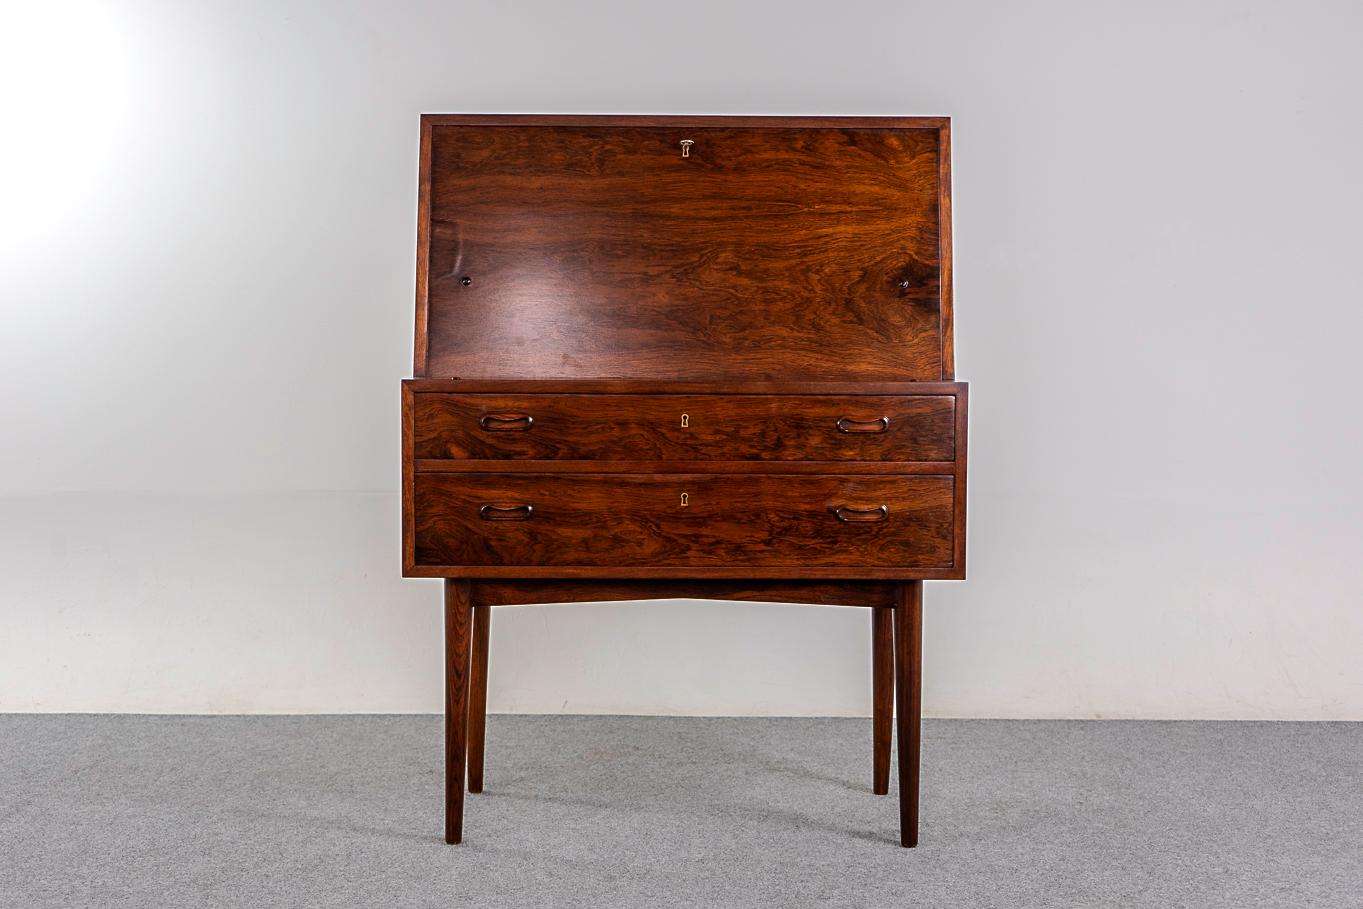 Rosewood Danish secretary desk, circa 1960's. Sleek angular profile and elegant tapering legs. Stunning bookmatched veneer case with contrasting beech wood fitted interior. Minor veneer bubble on drop down front.